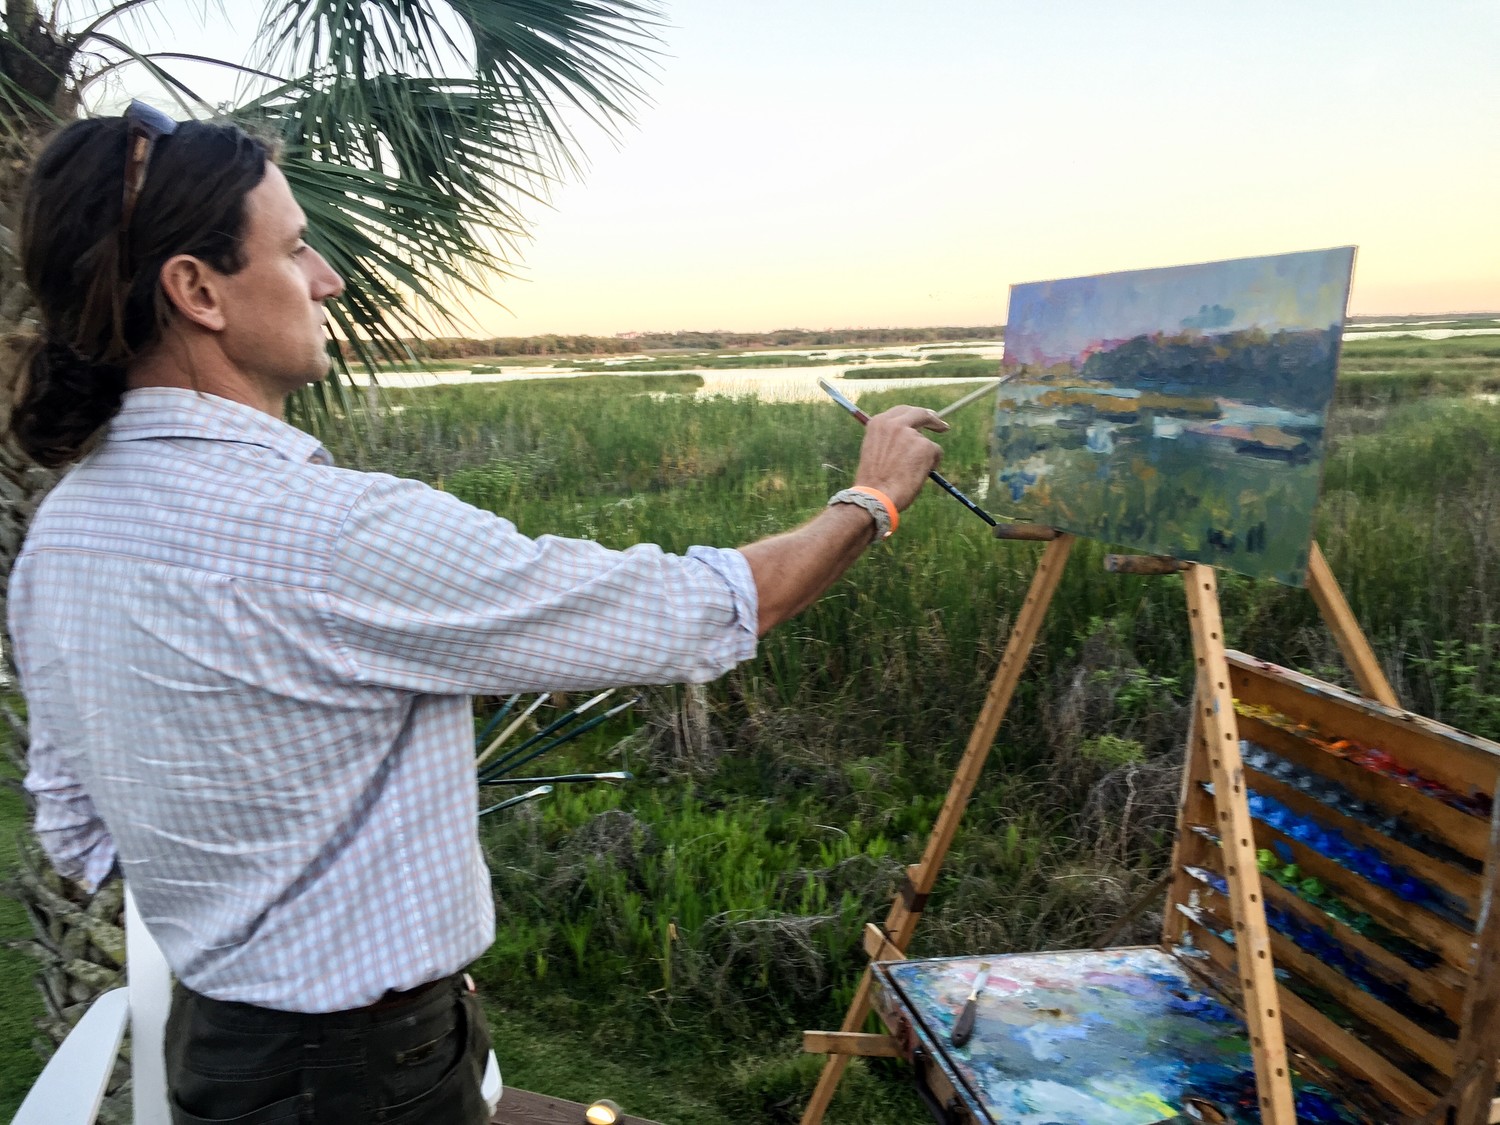 Eugene Quinn paints a scene at the Guana Preserve.